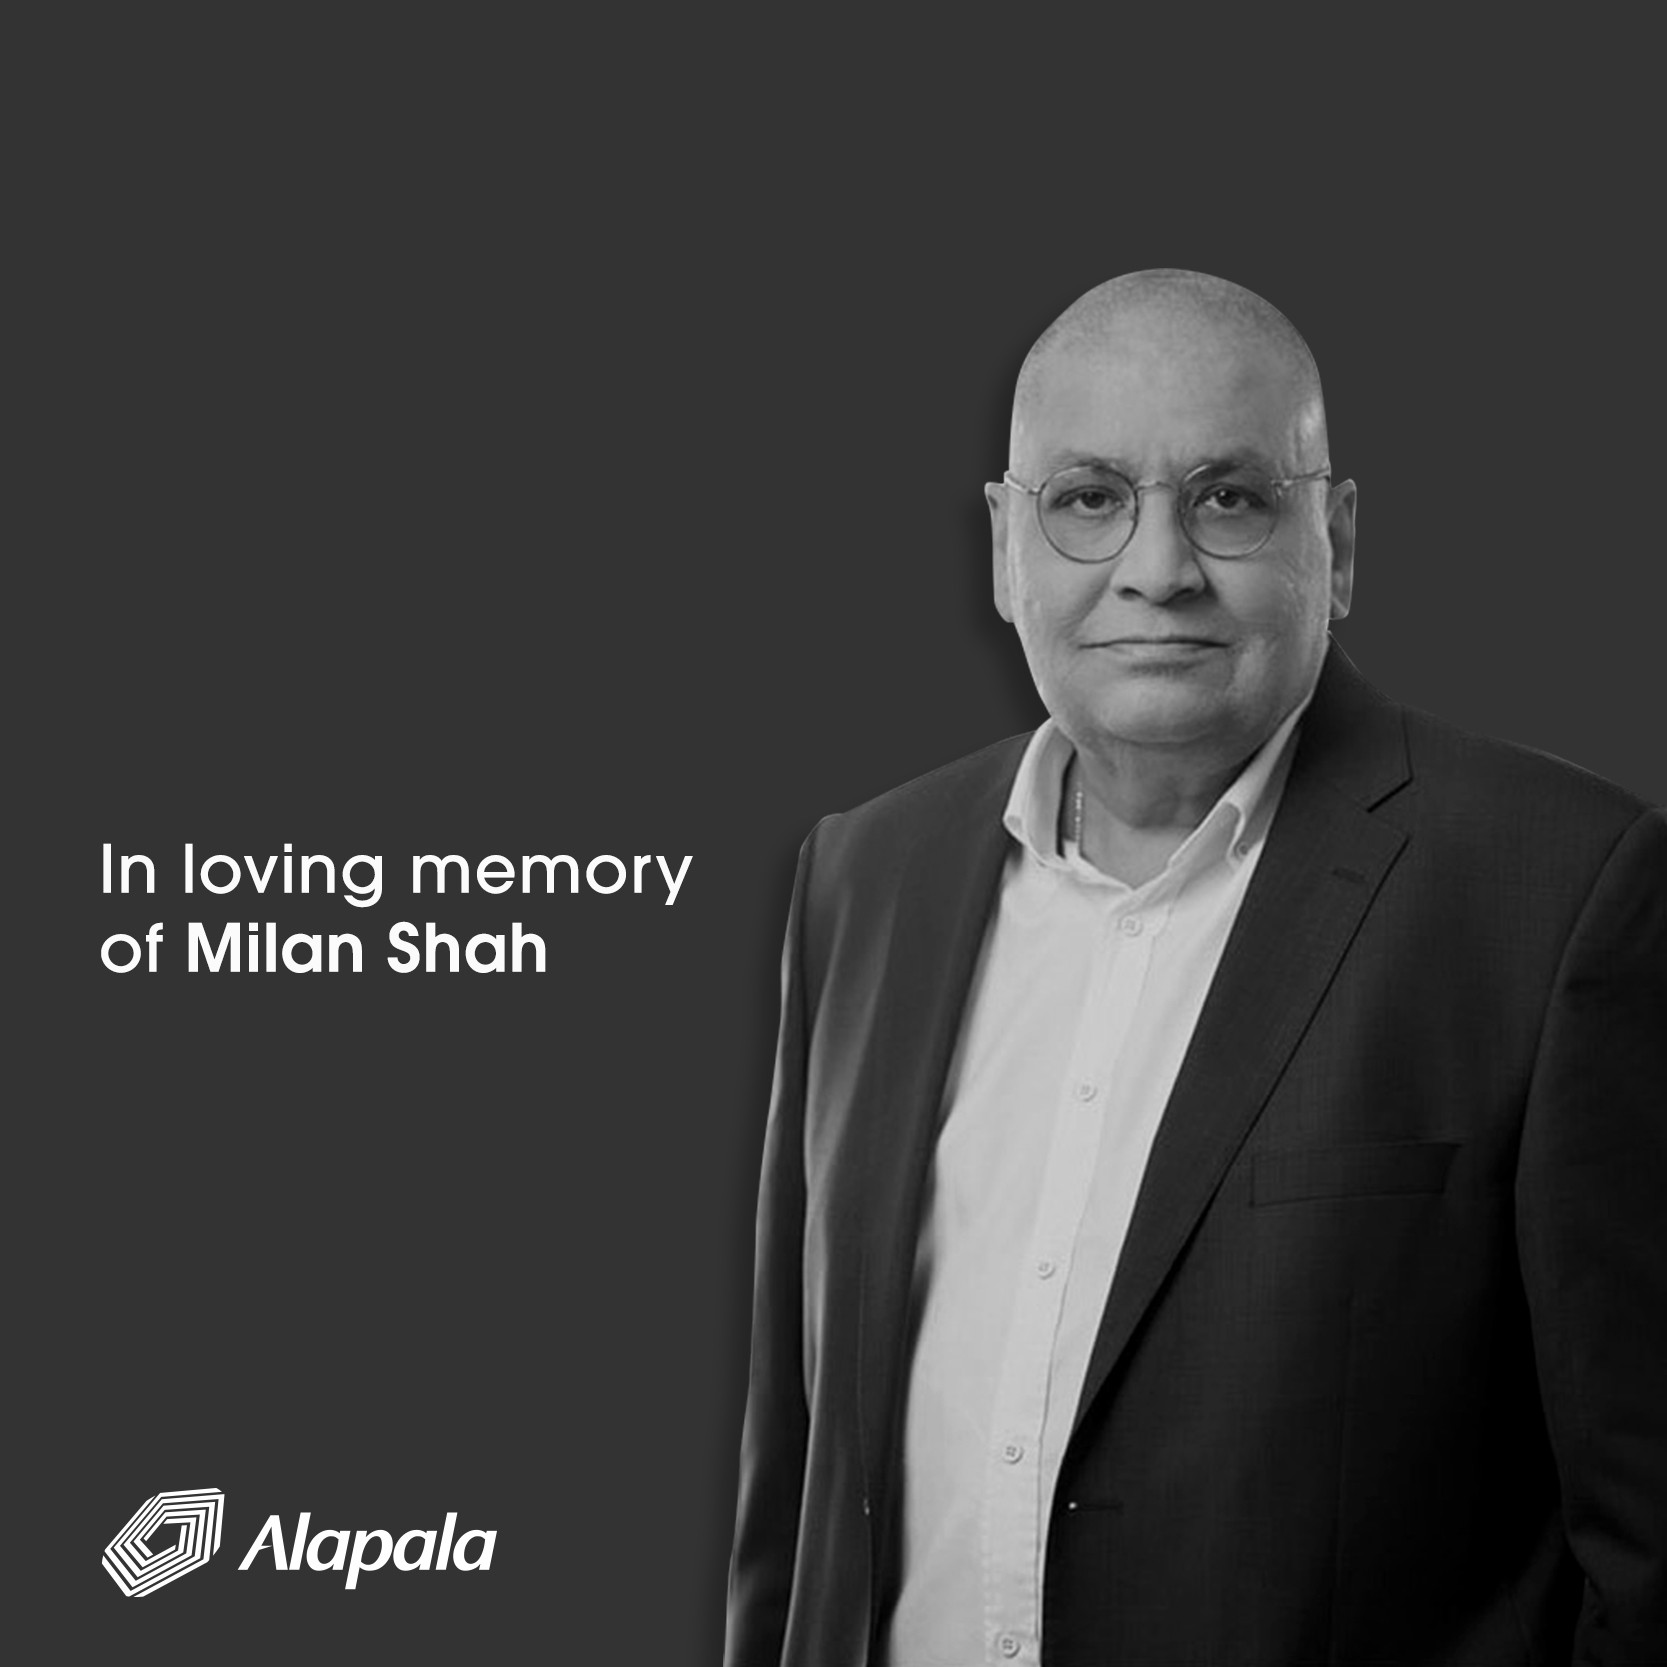 Milan Shah, the Technical Director of Alapala, has died